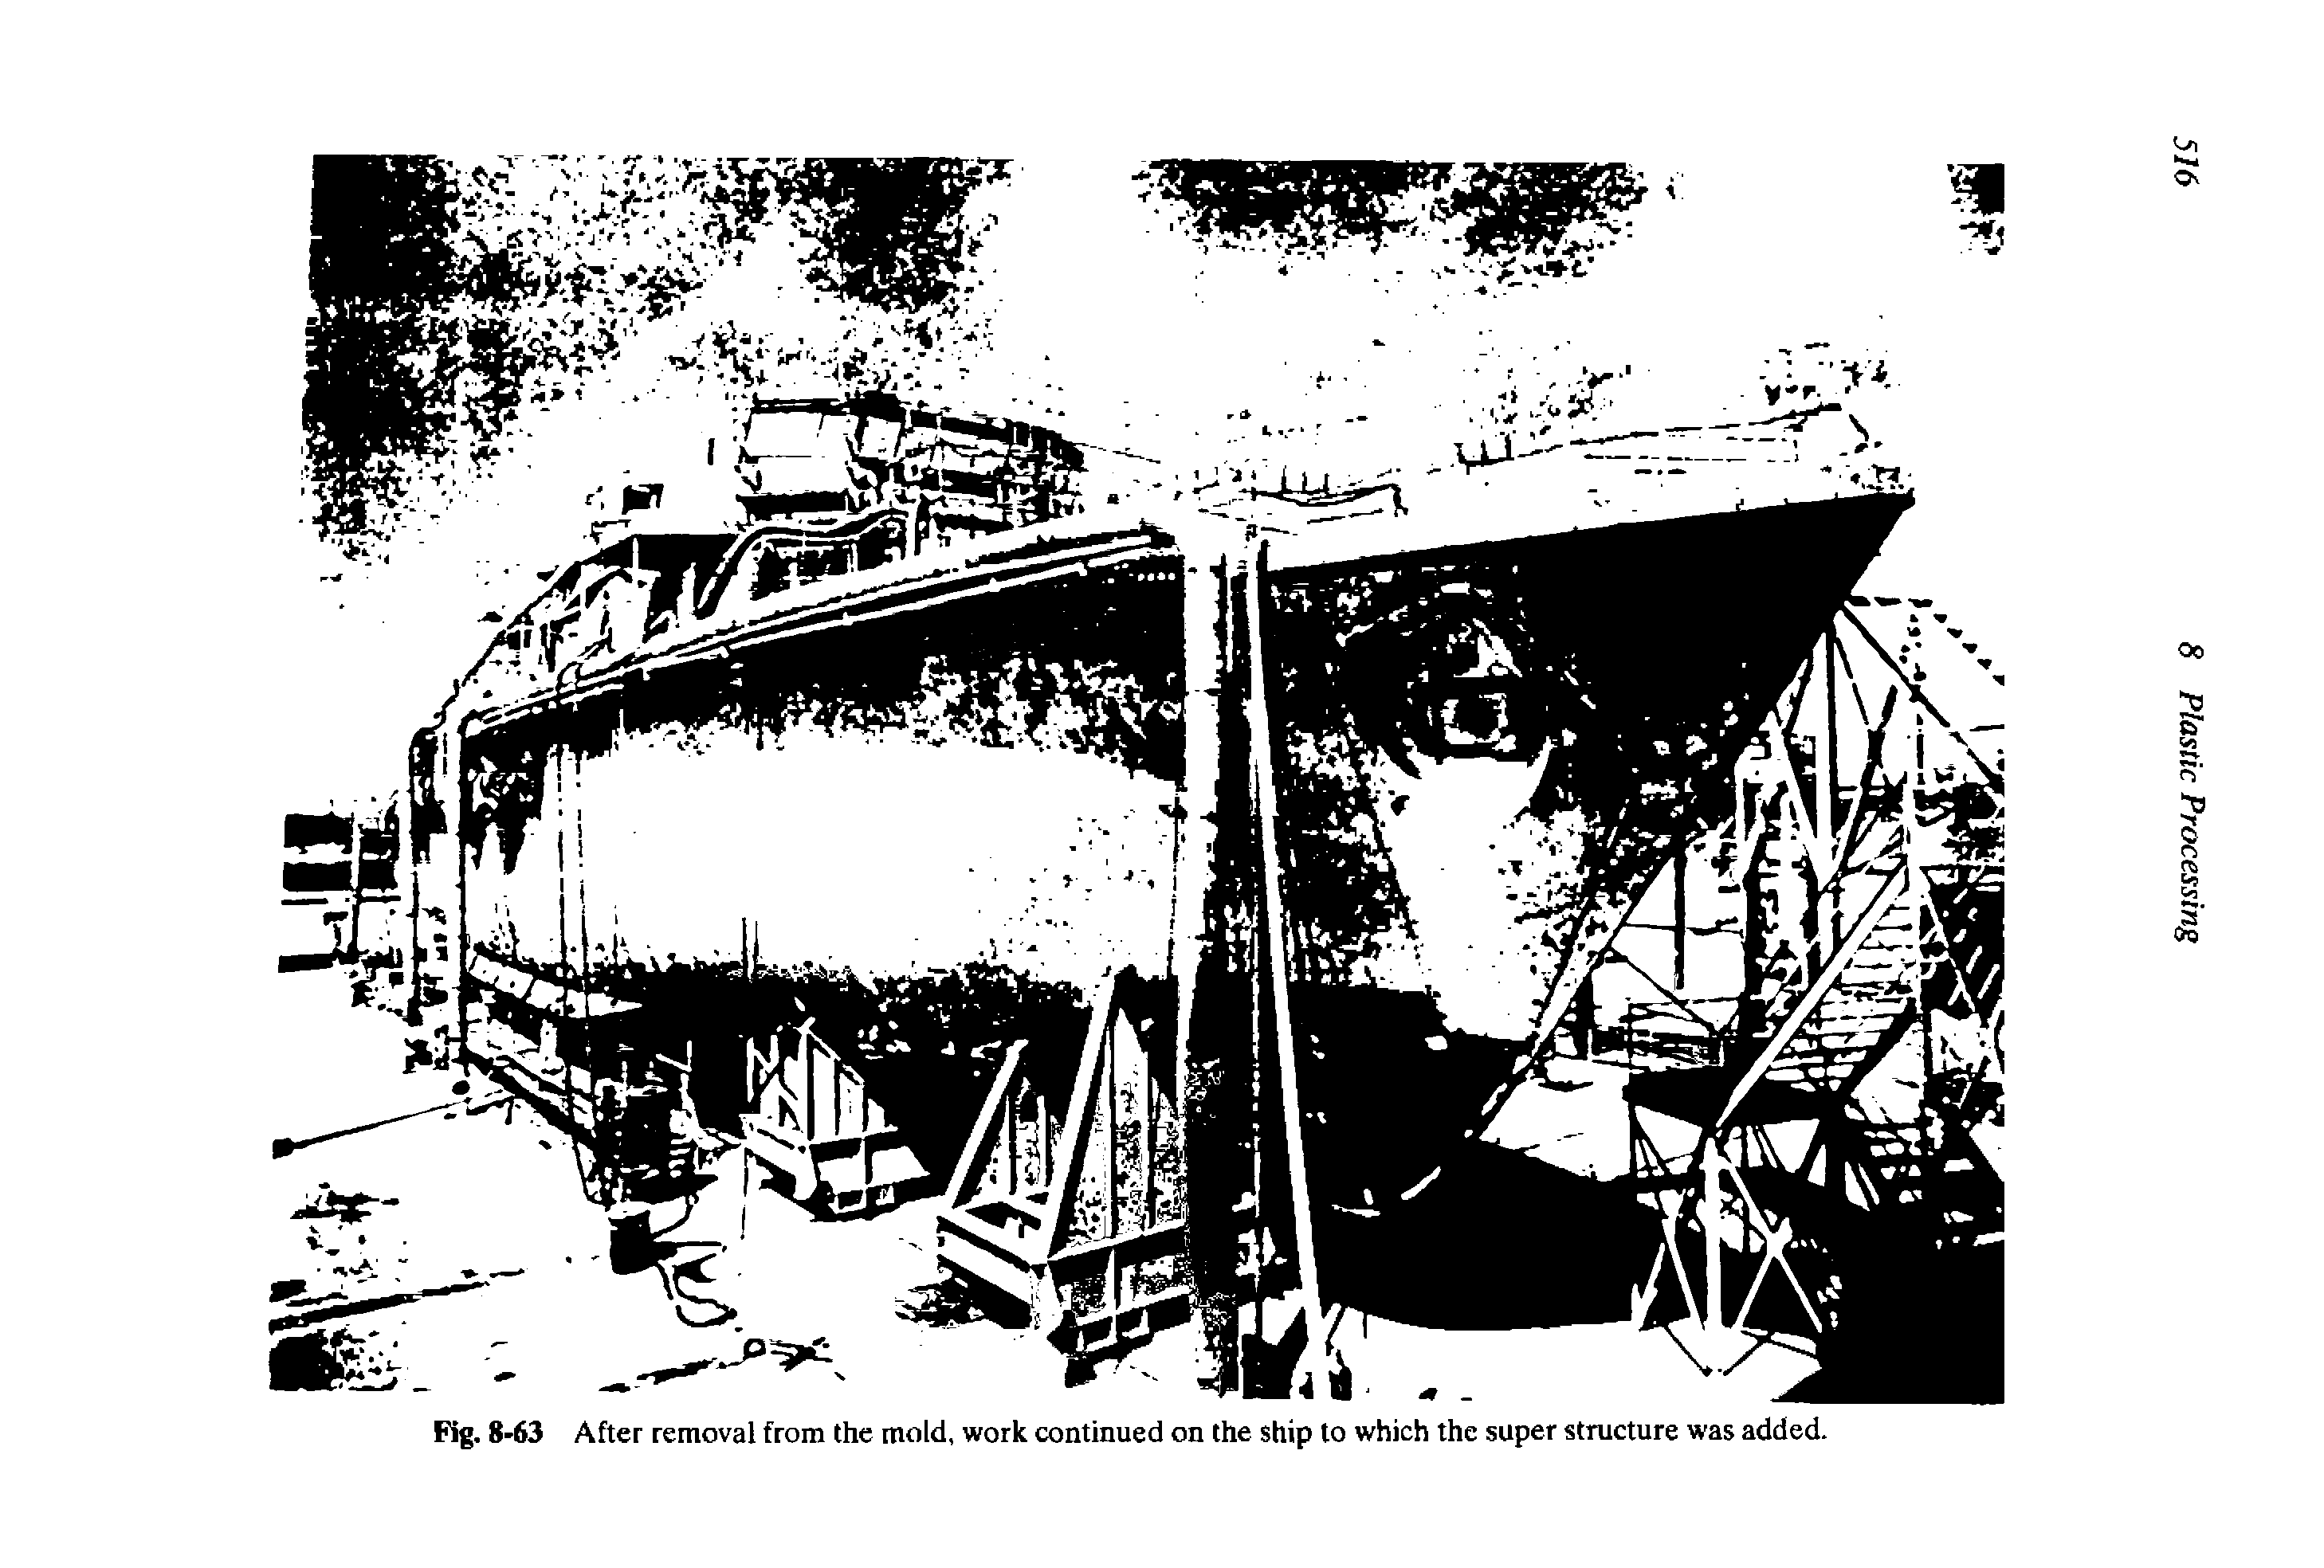 Fig. 8-63 After removal from the mold, work continued on the ship to which the super structure was added.